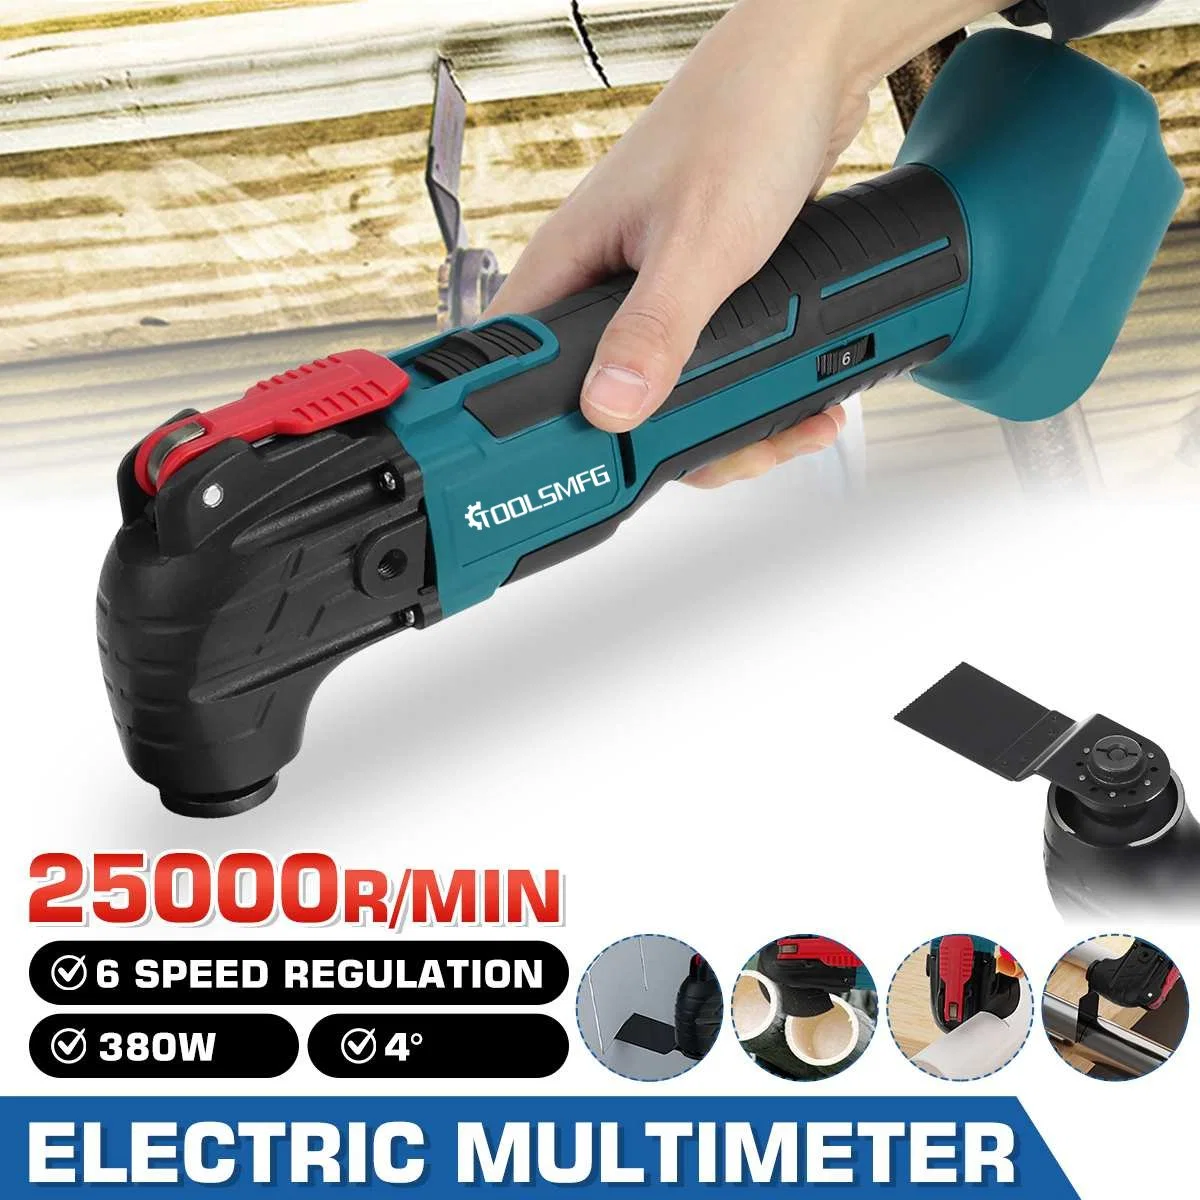 Toolsmfg Cordless Oscillating Multi-Tools Electric Trimmer Saws Home Rechargeable Woodworking Power Tools for Makita 18V